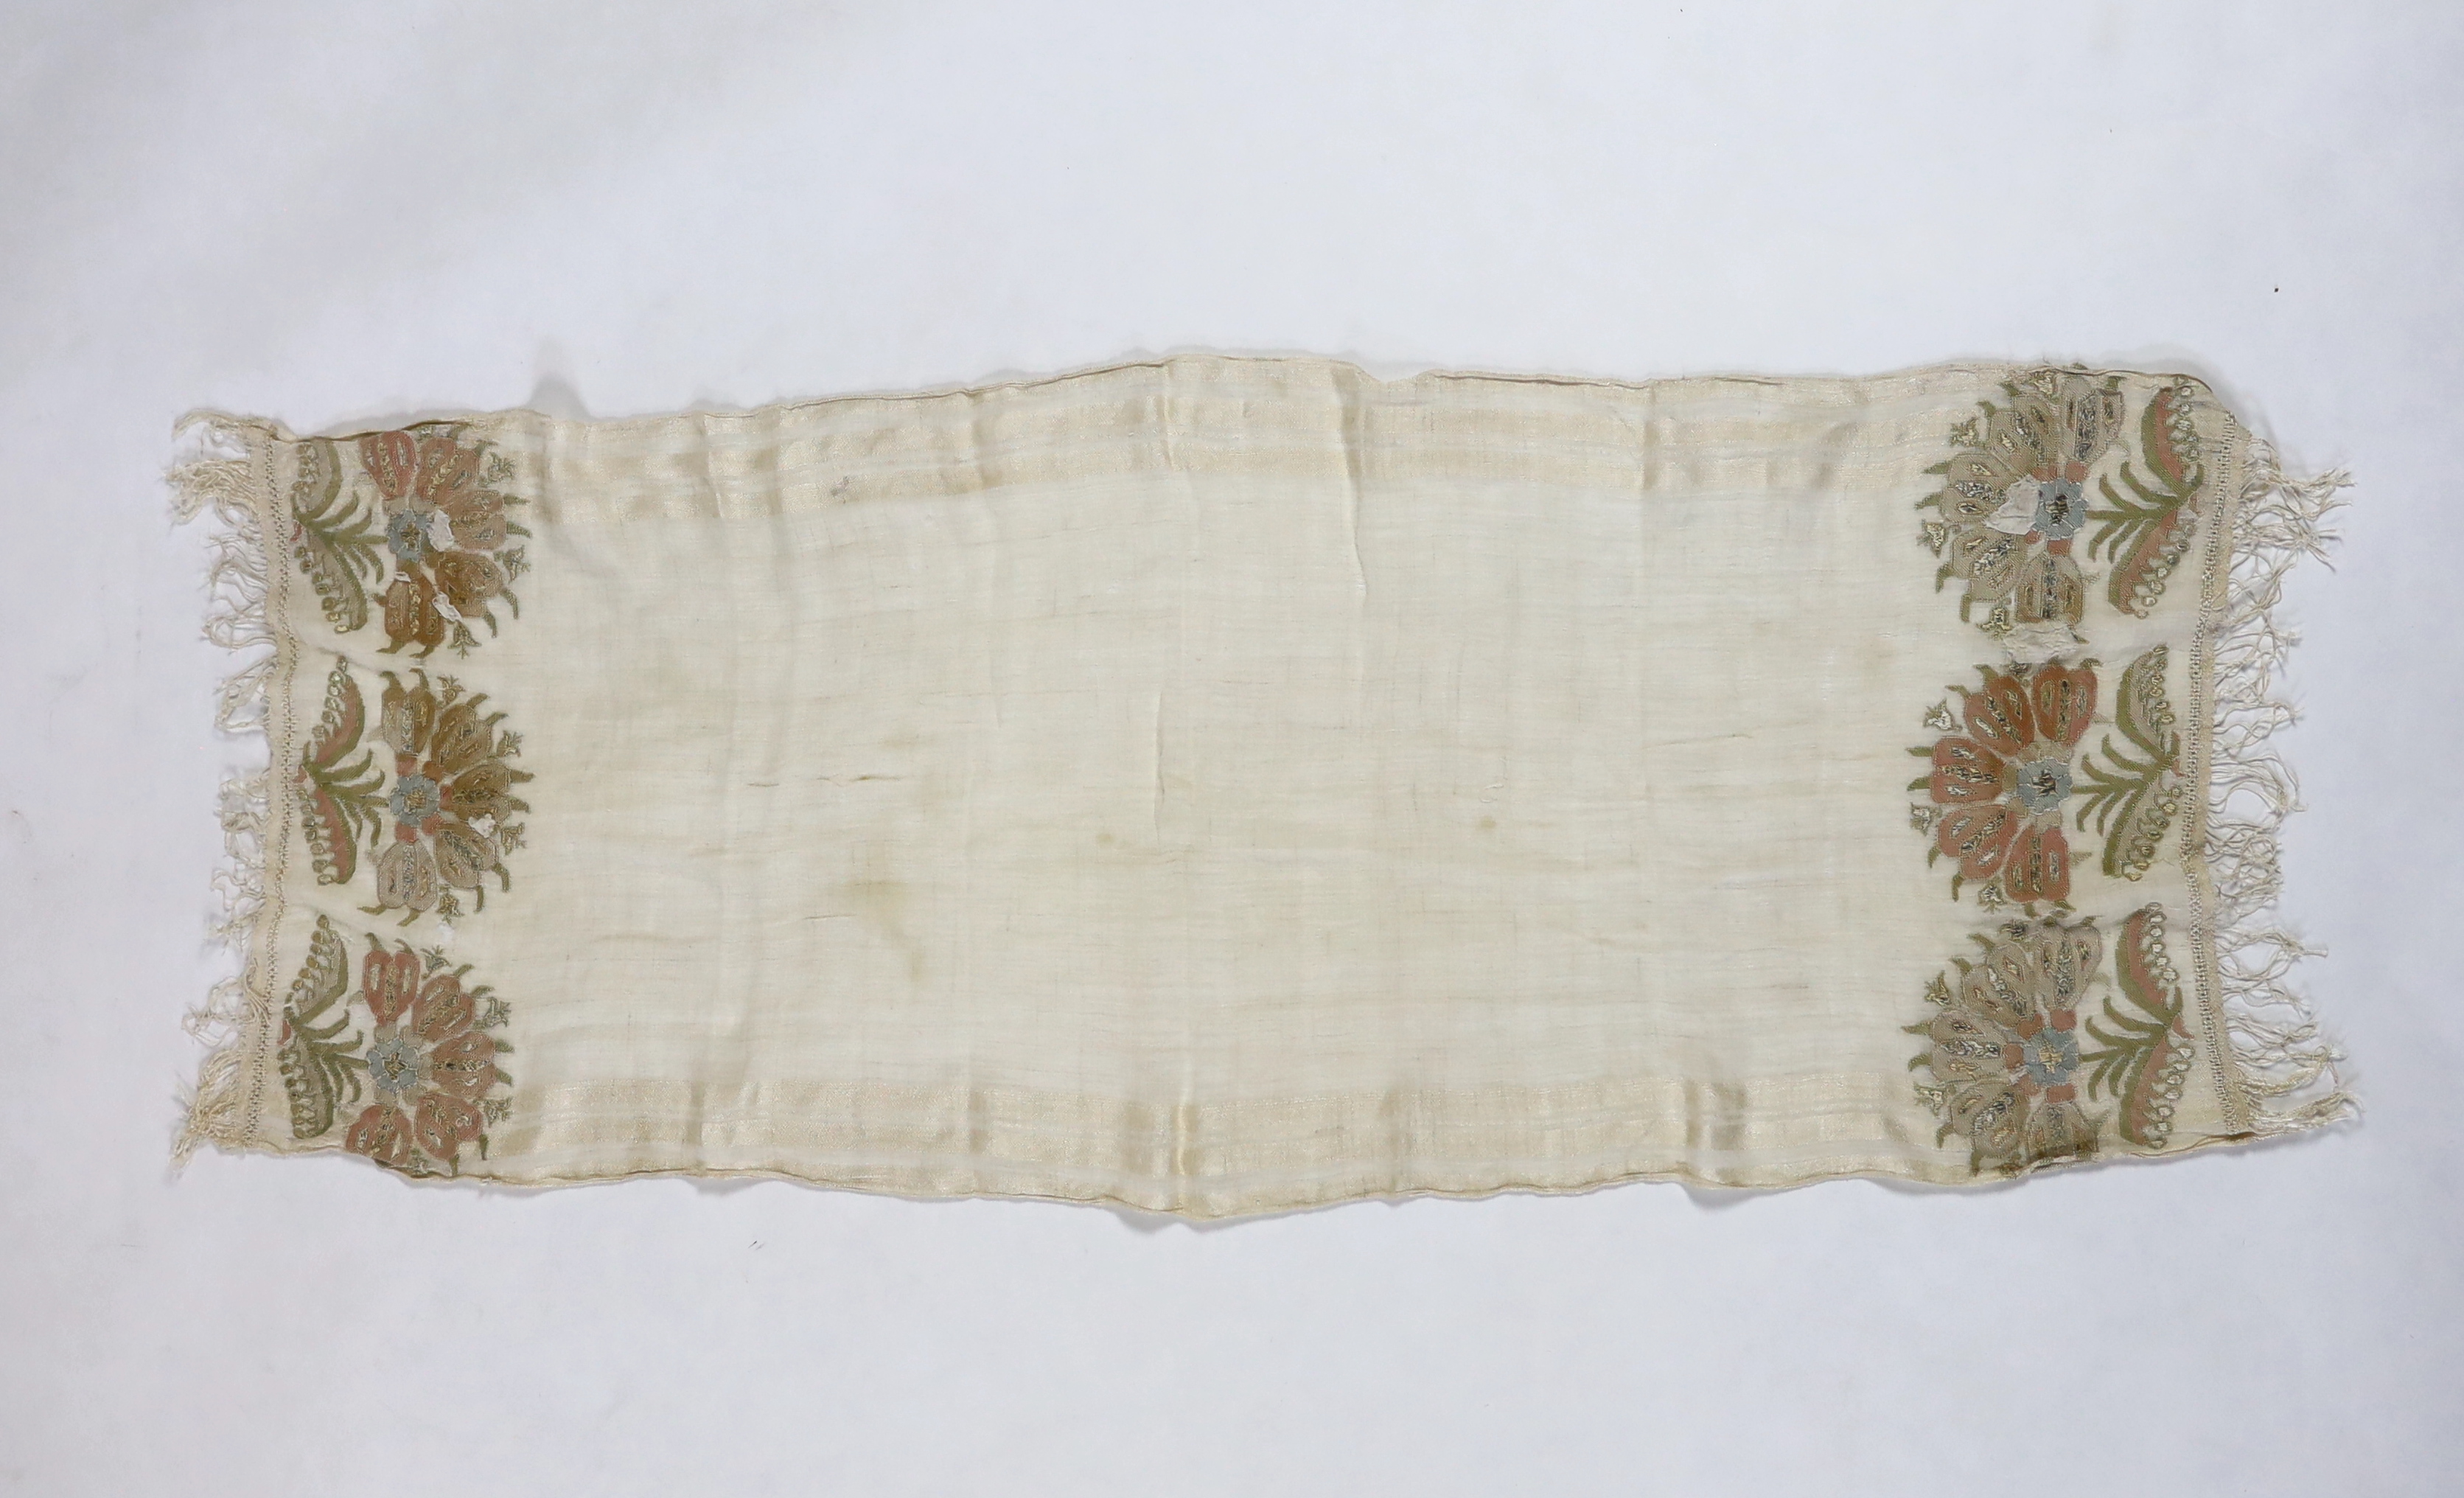 A 19th century Turkish towel, embroidered with flower motifs, in pastel shades, with fine silk fringing embroidered onto a fine hand spun linen, woven with stripes to each side, 48cm wide, 120cm long